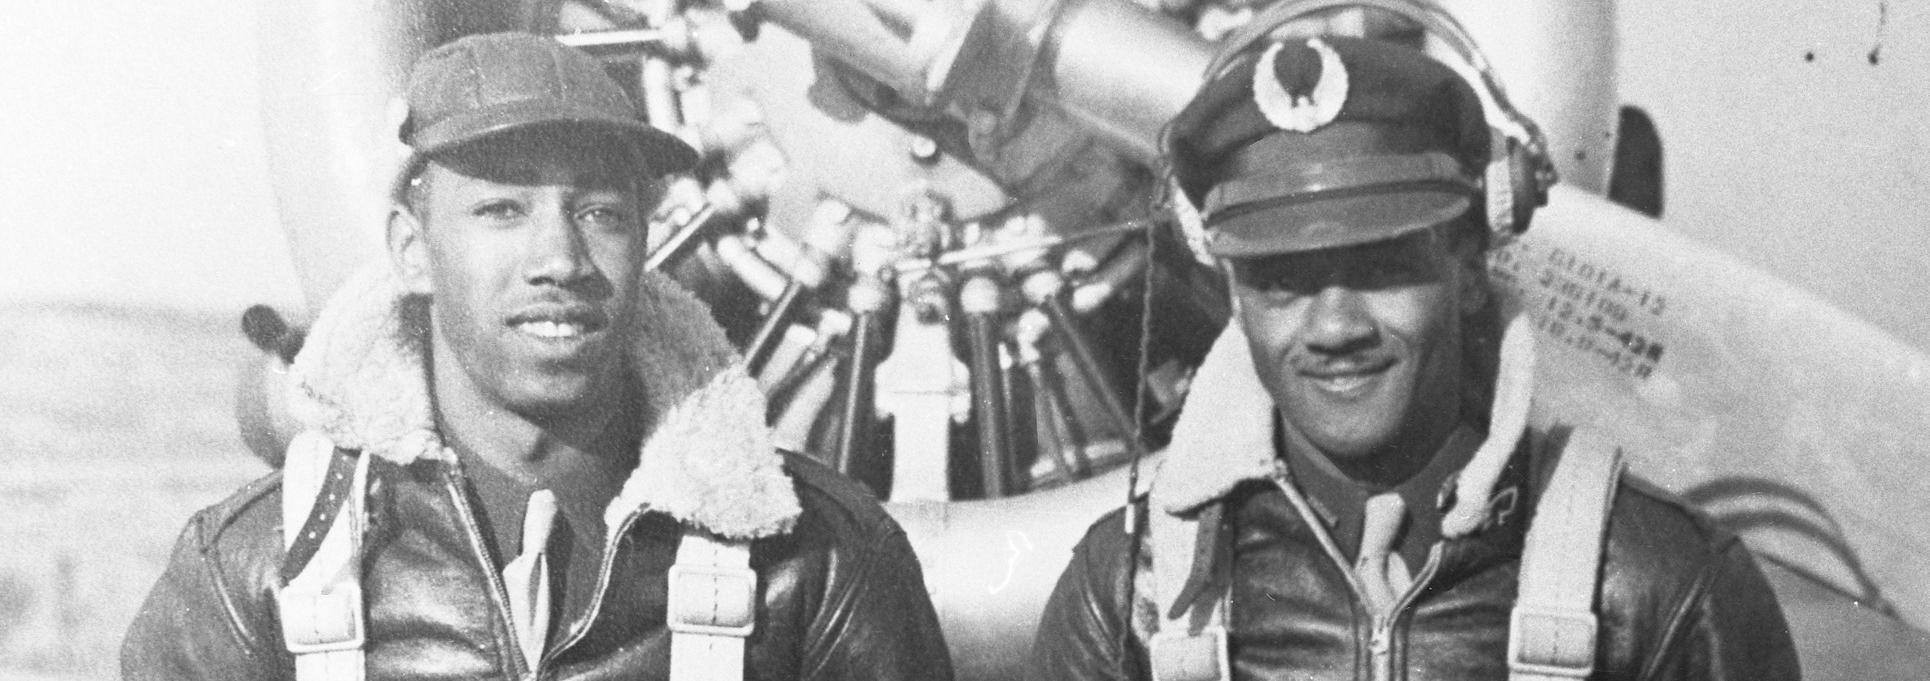 Black and white photo with two African American men wearing bomber jackets and harnesses standing in front of a propeller plane